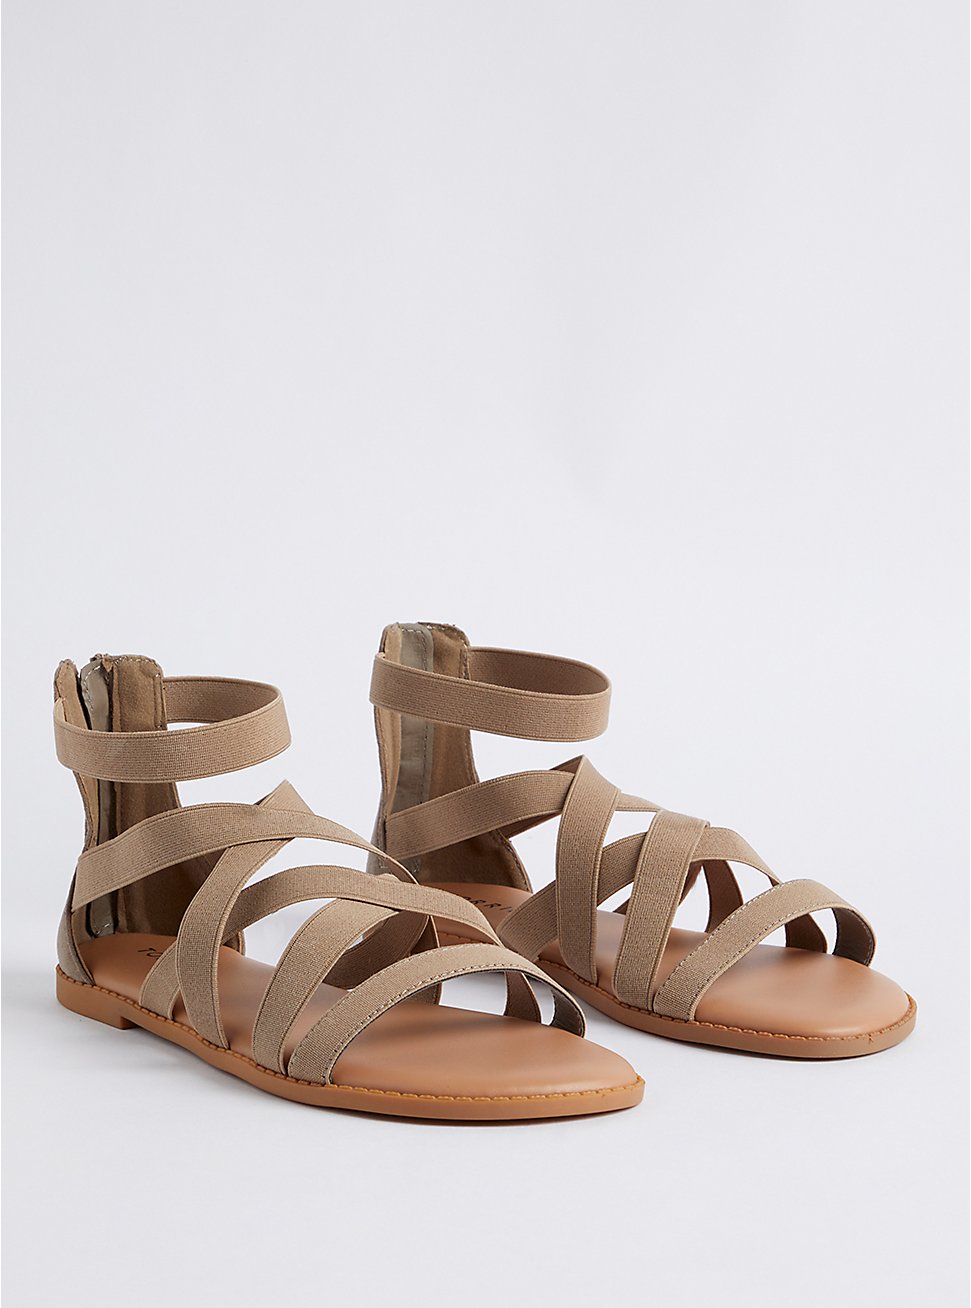 Gladiator Sandal - Stretch Strap Taupe (WW), TAUPE, hi-res